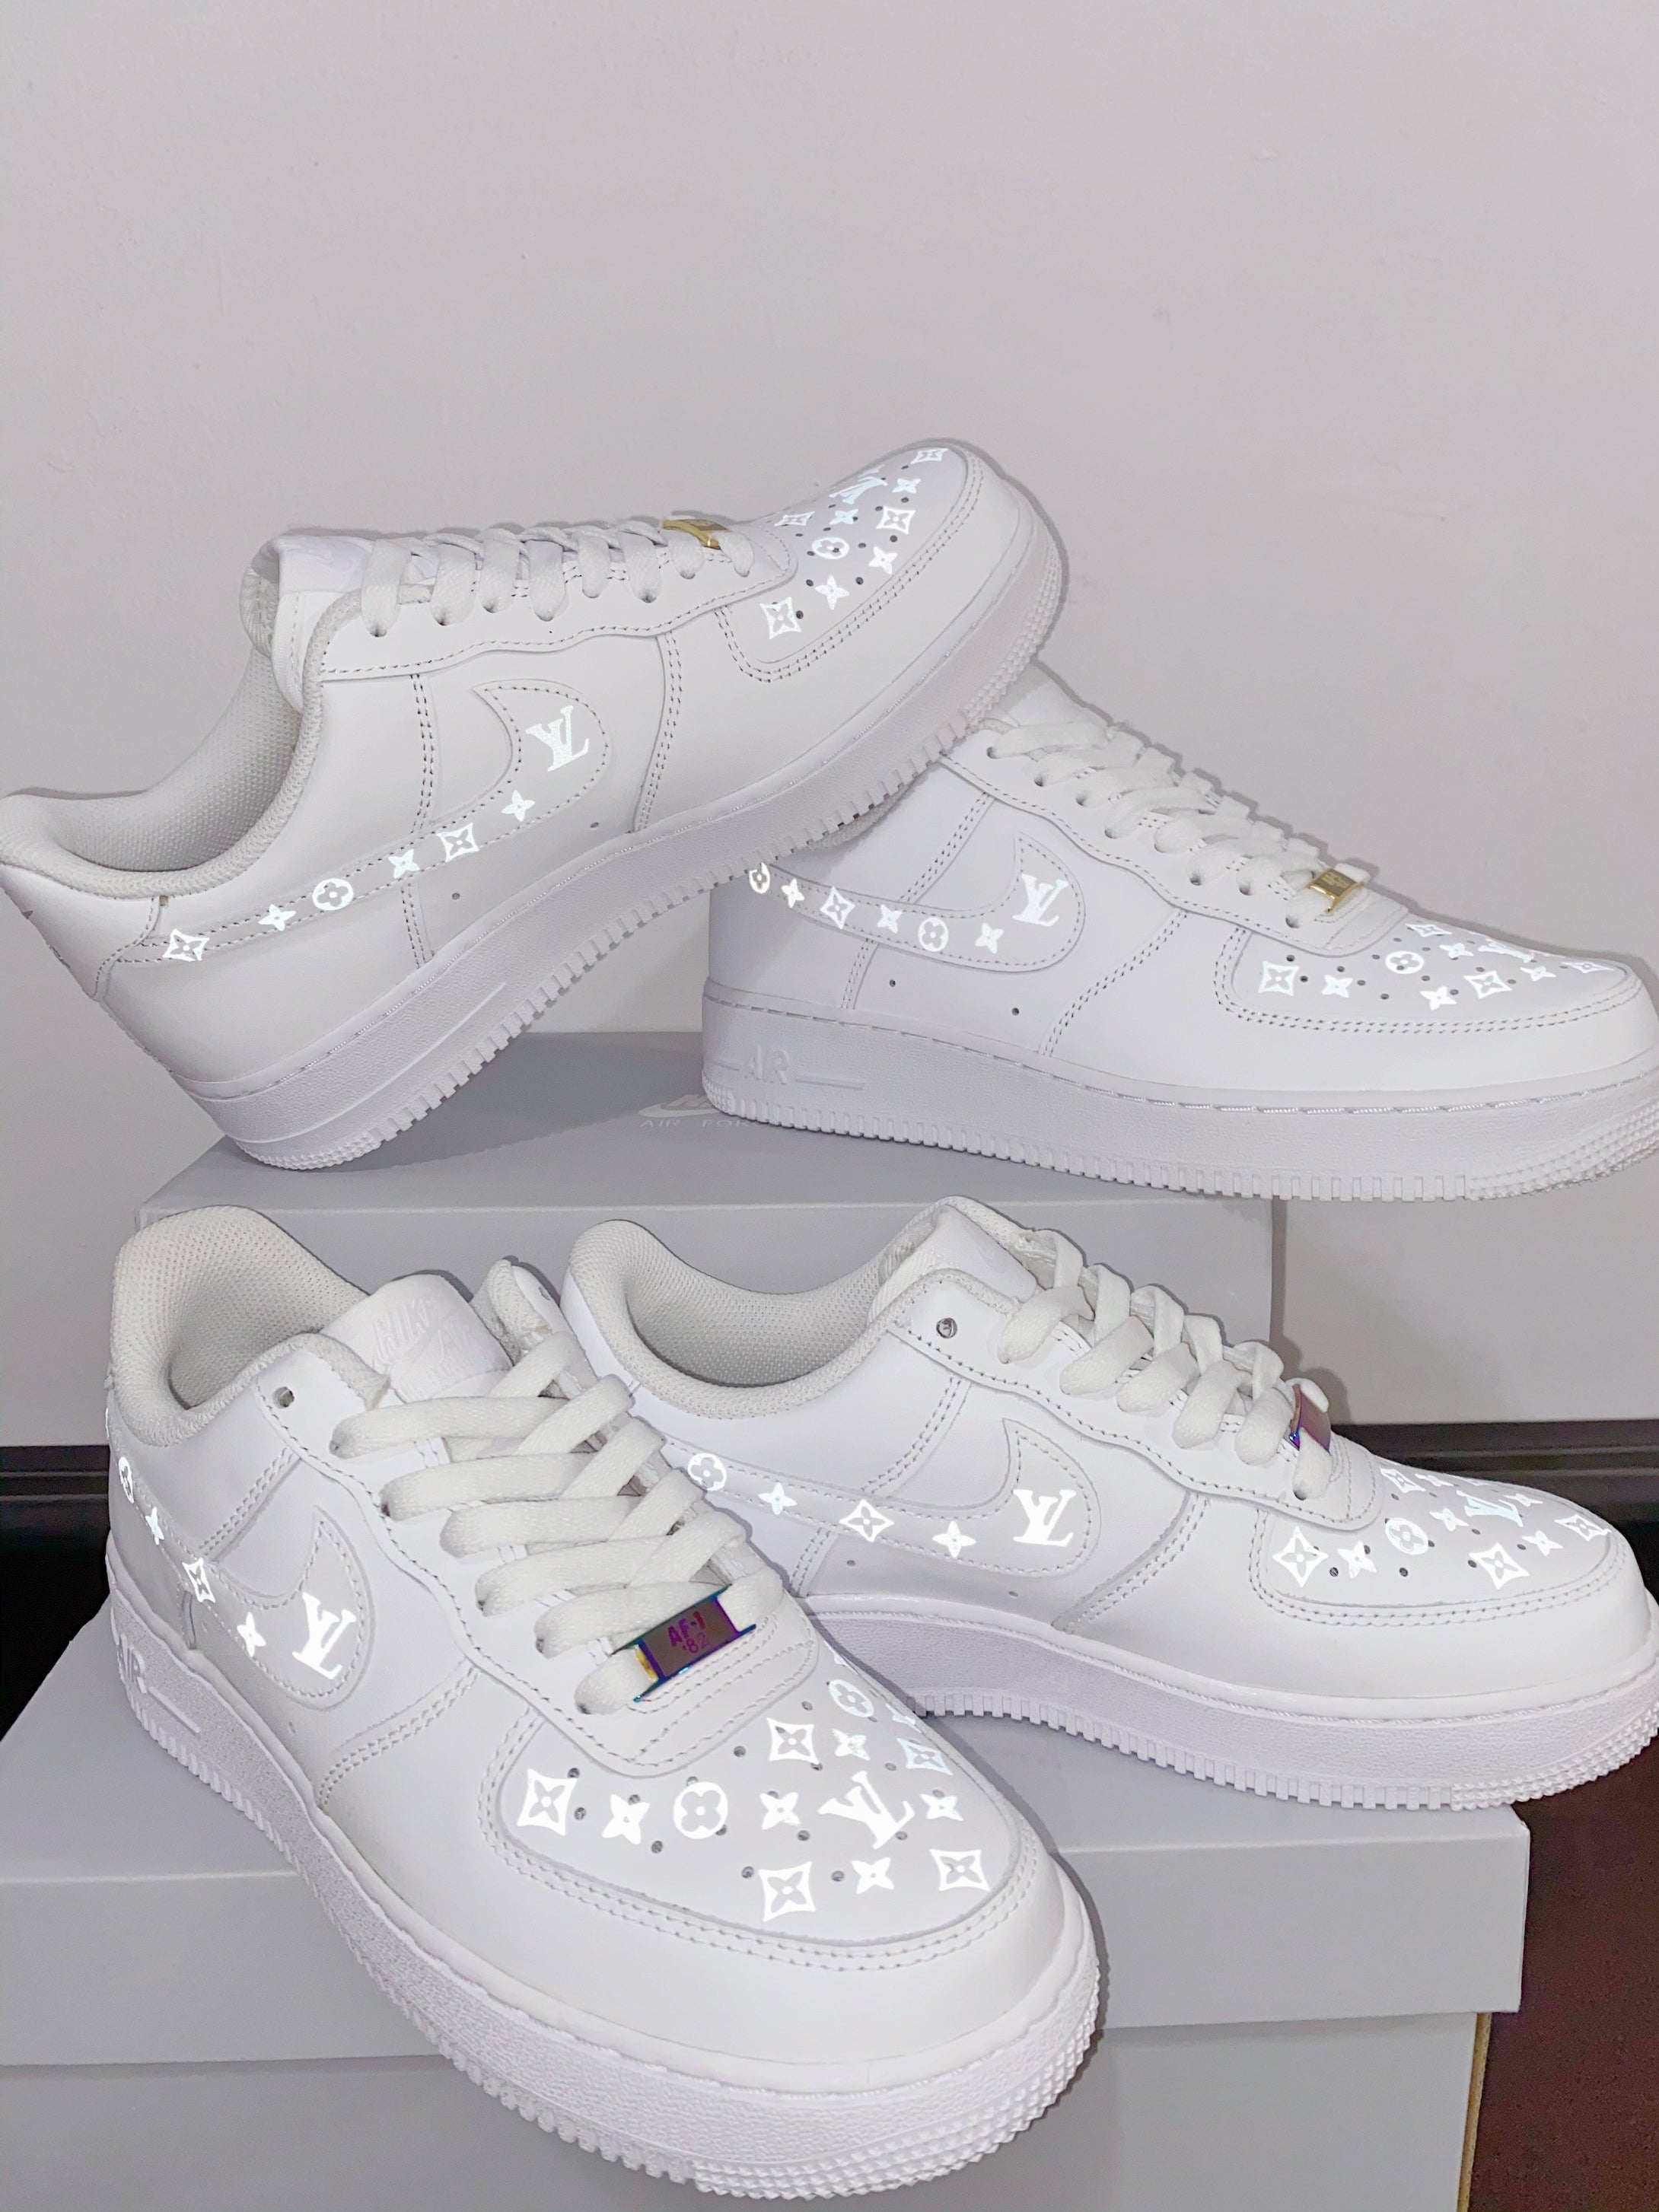 lv reflective air force 1